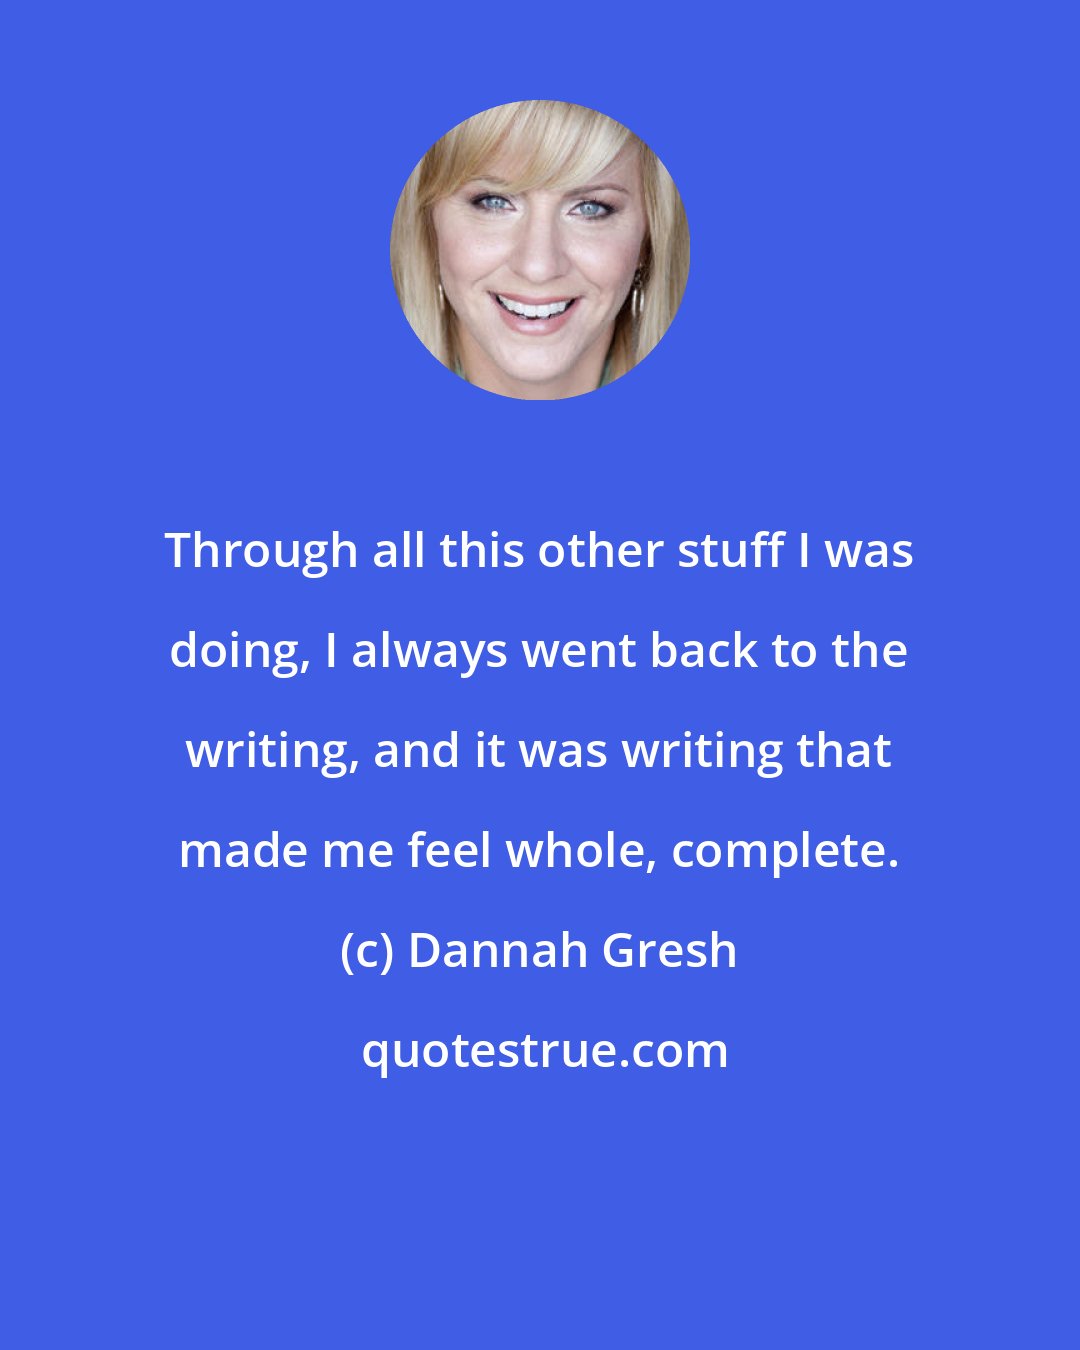 Dannah Gresh: Through all this other stuff I was doing, I always went back to the writing, and it was writing that made me feel whole, complete.